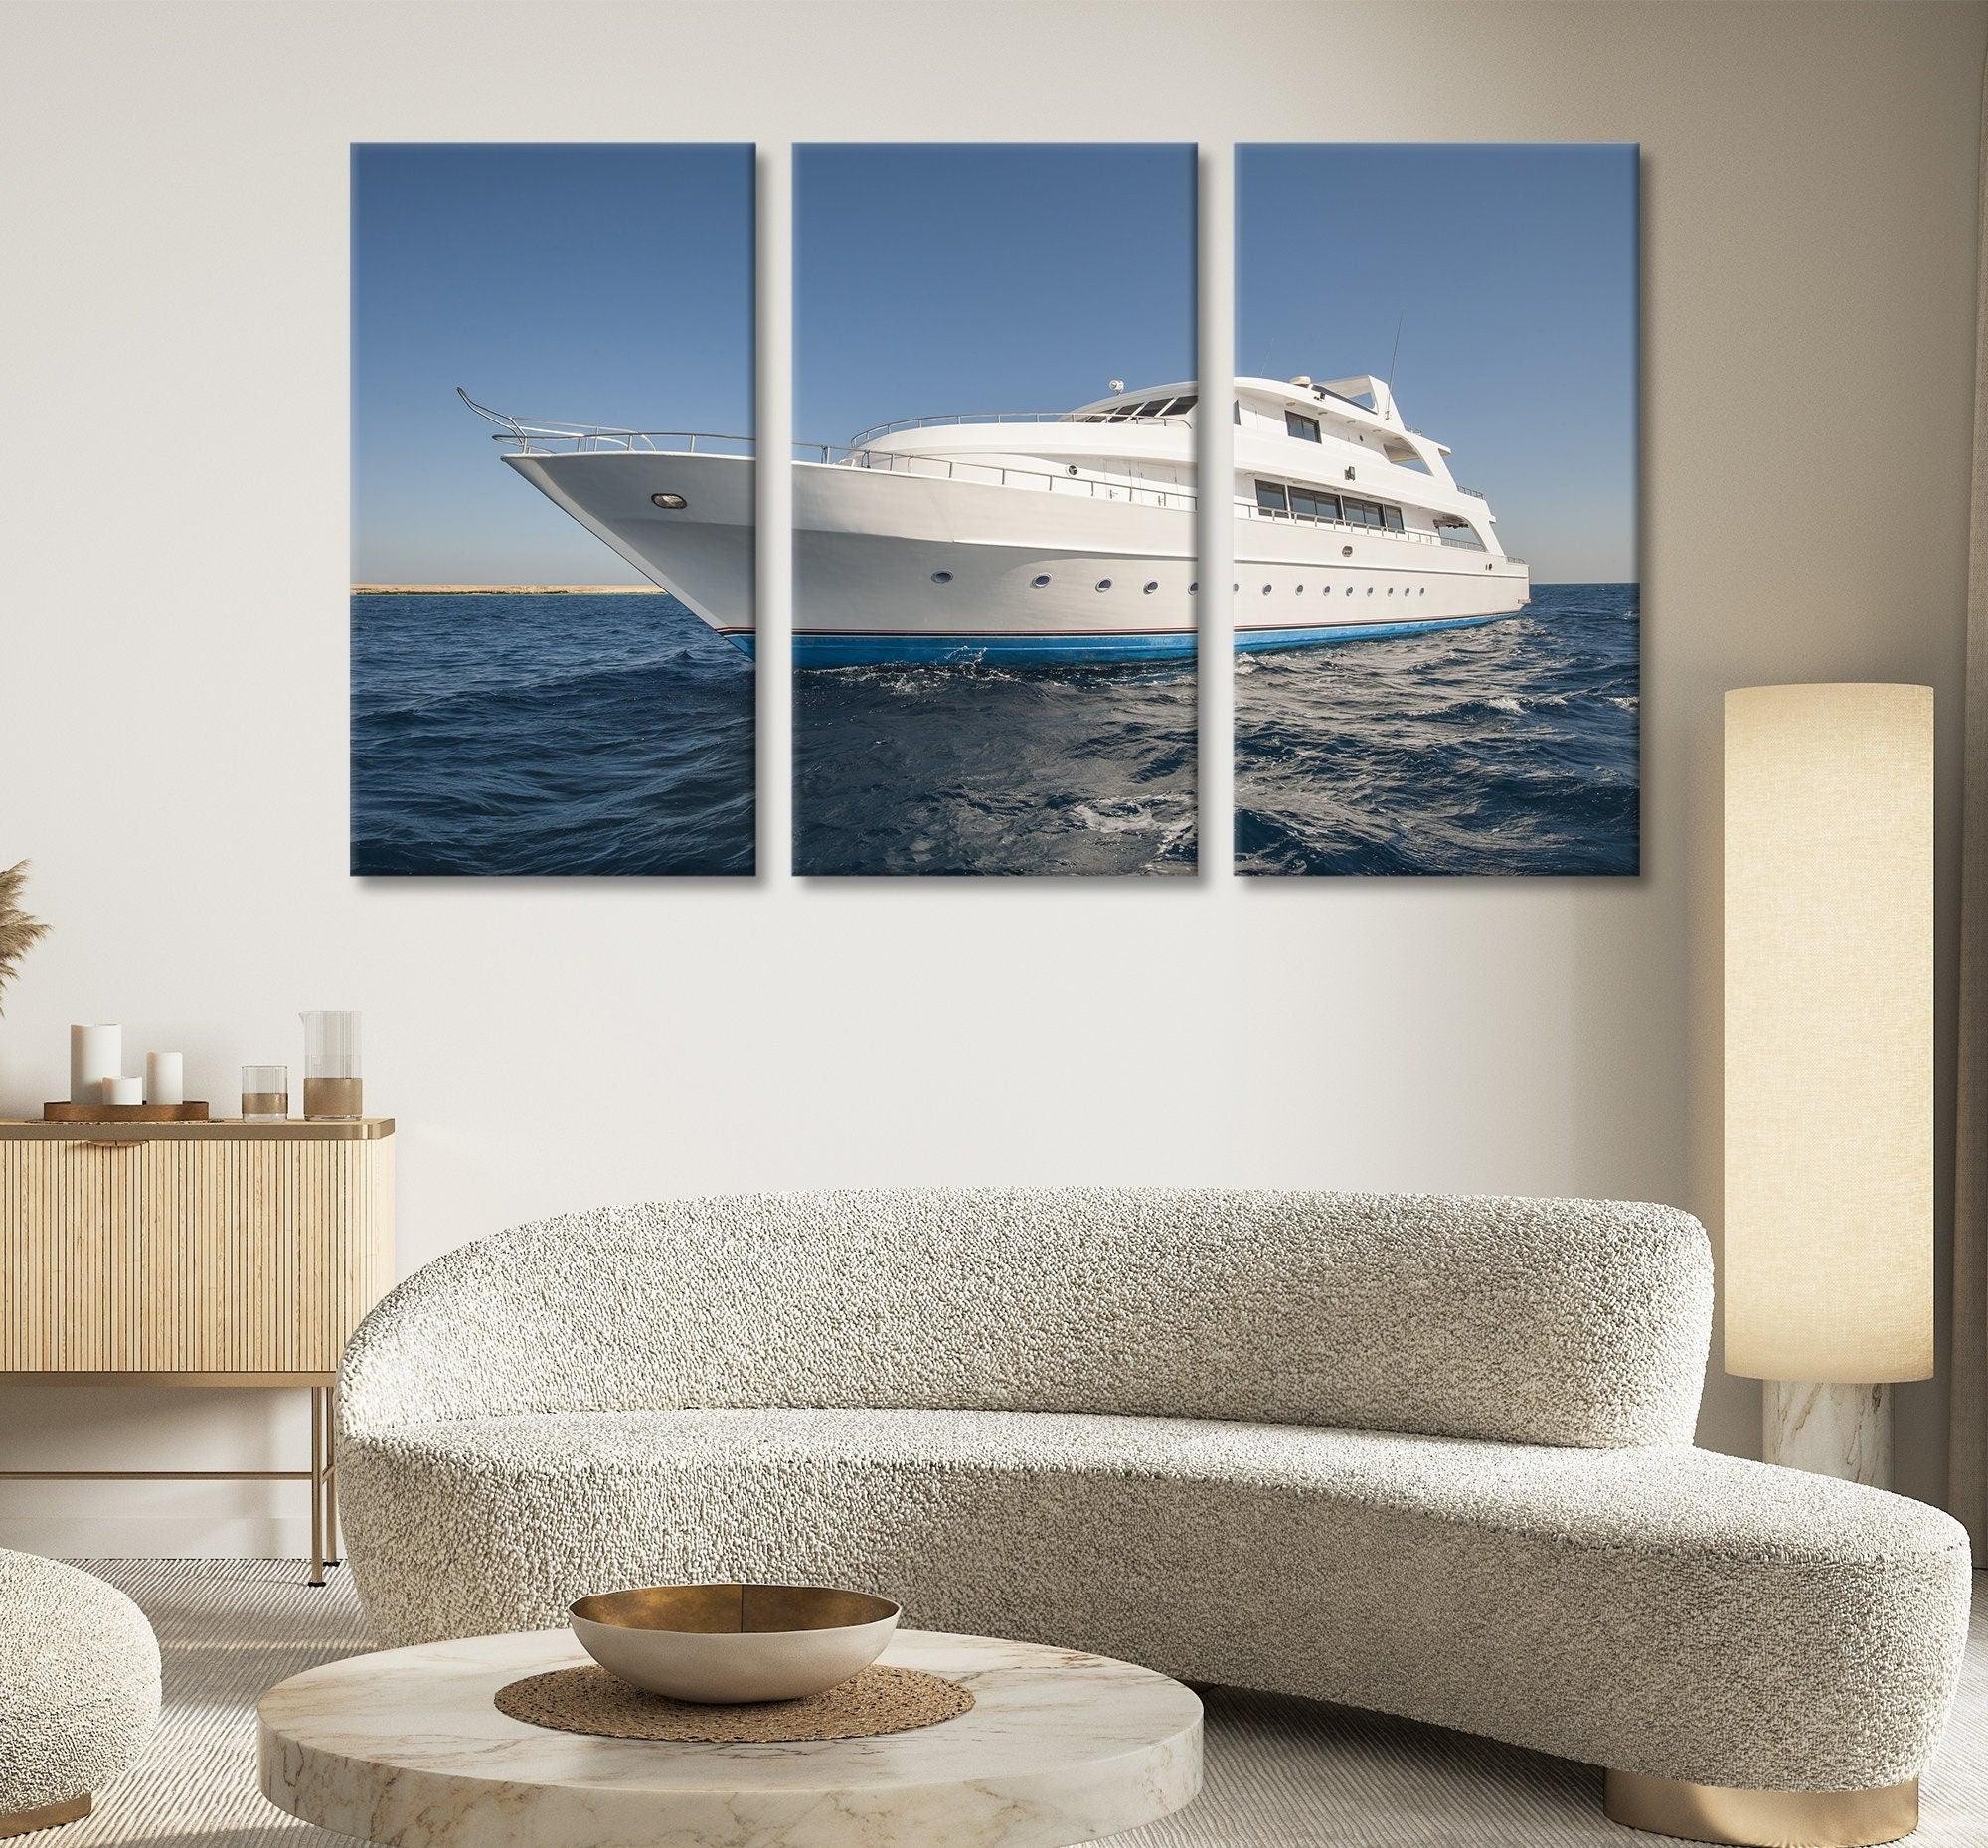 Ship in Sea canvas wall art| Cruise Liner Painting Art on Canvas, Travel Art for Wall, Ship Modern Artwork, boat wall art, decor